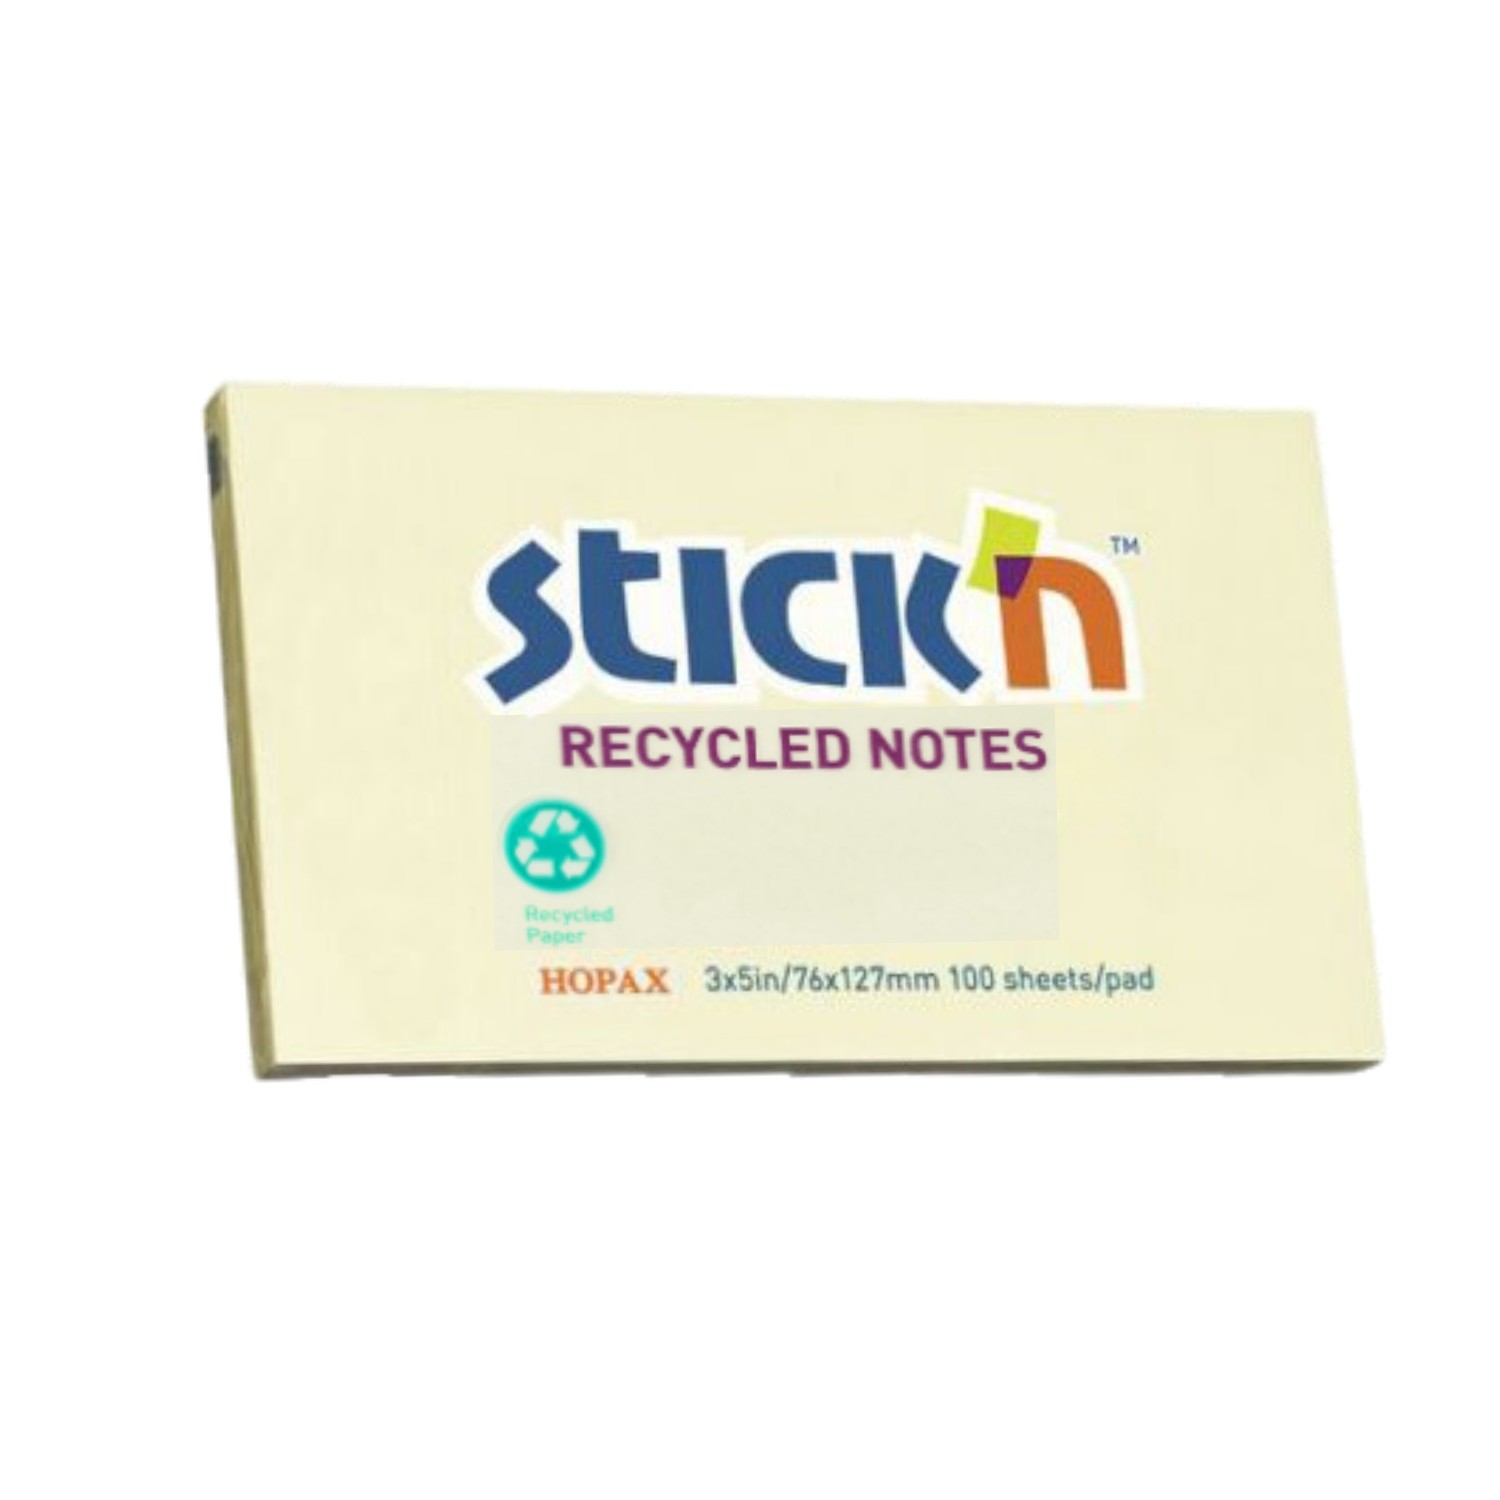 Stick+%27n+Recycled+Notes+76+x+127mm+Yellow